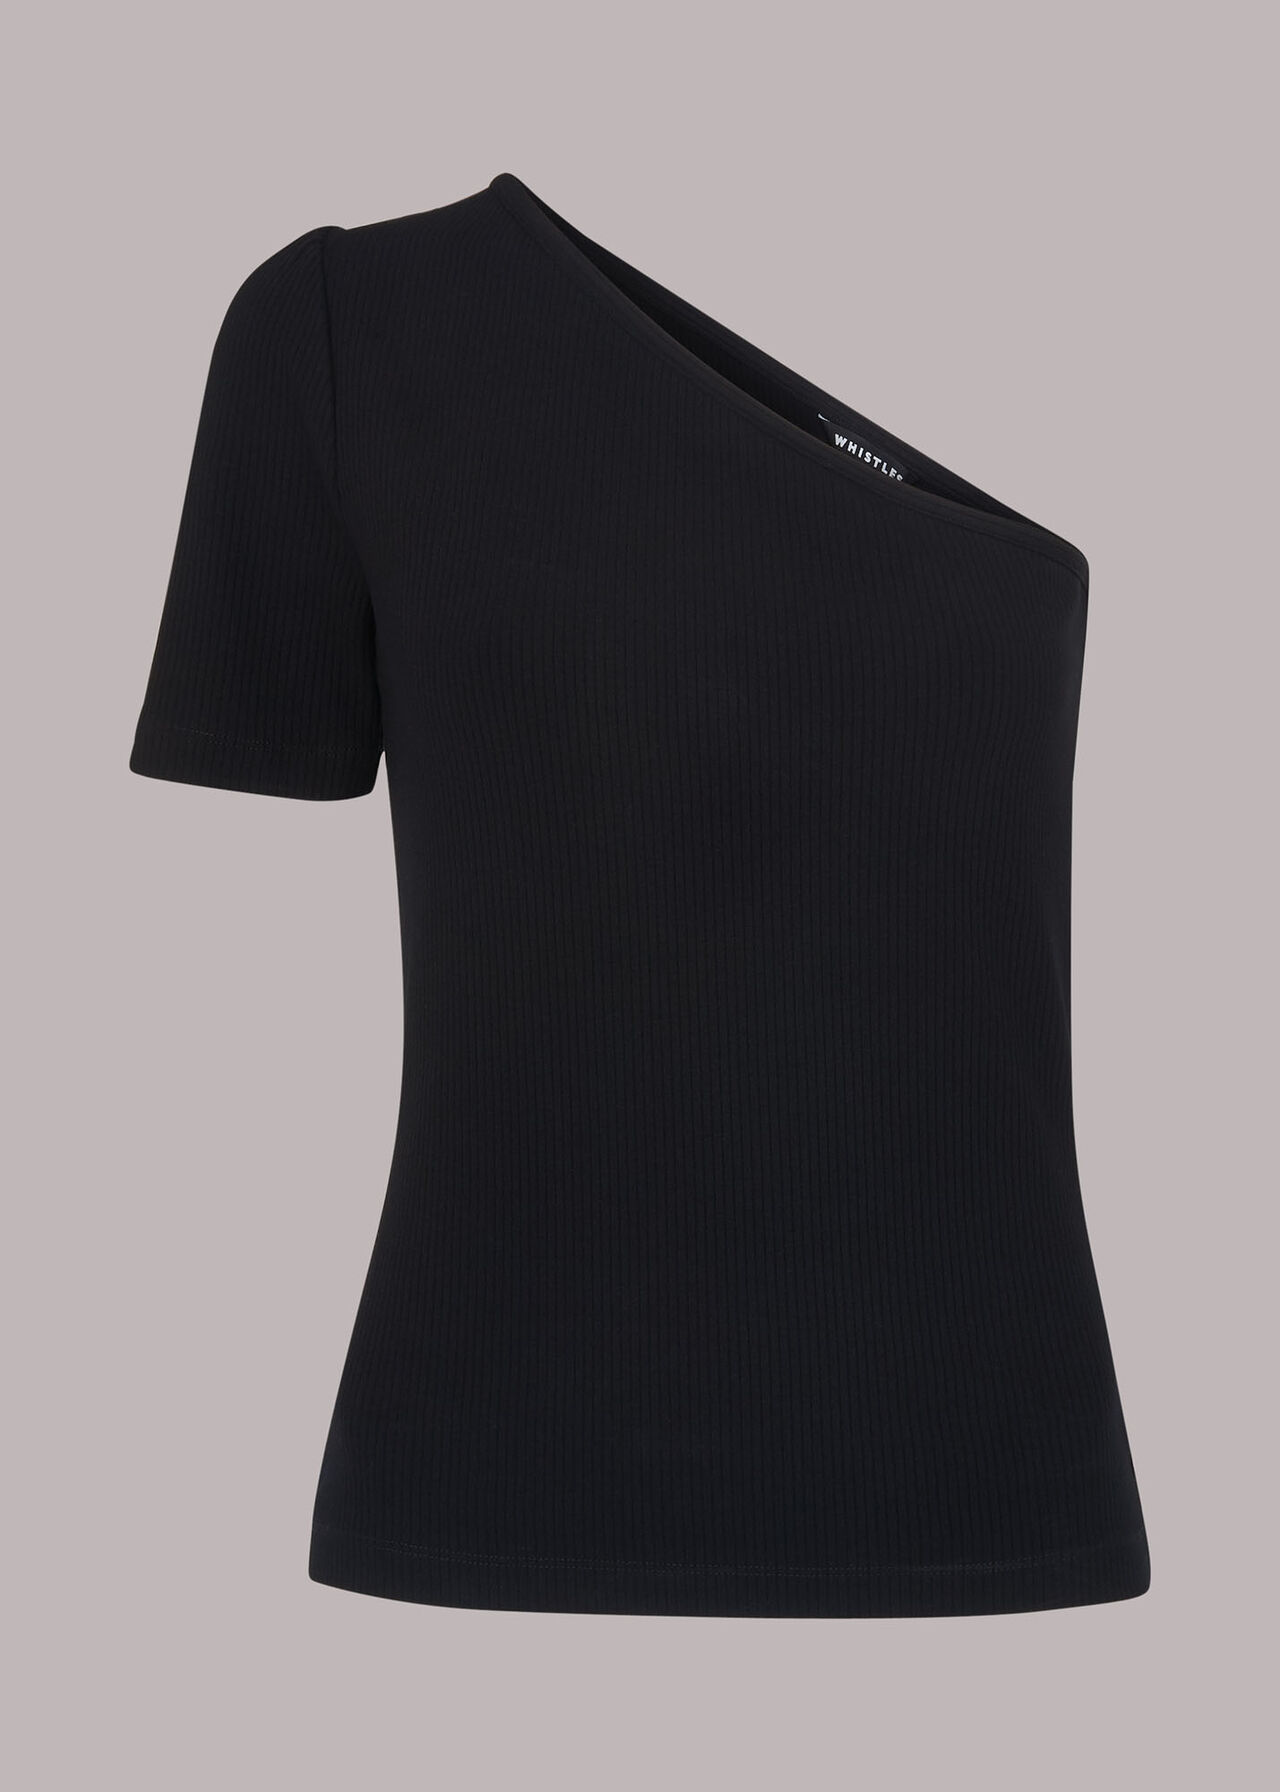 Black Ribbed One Sleeve Top | WHISTLES